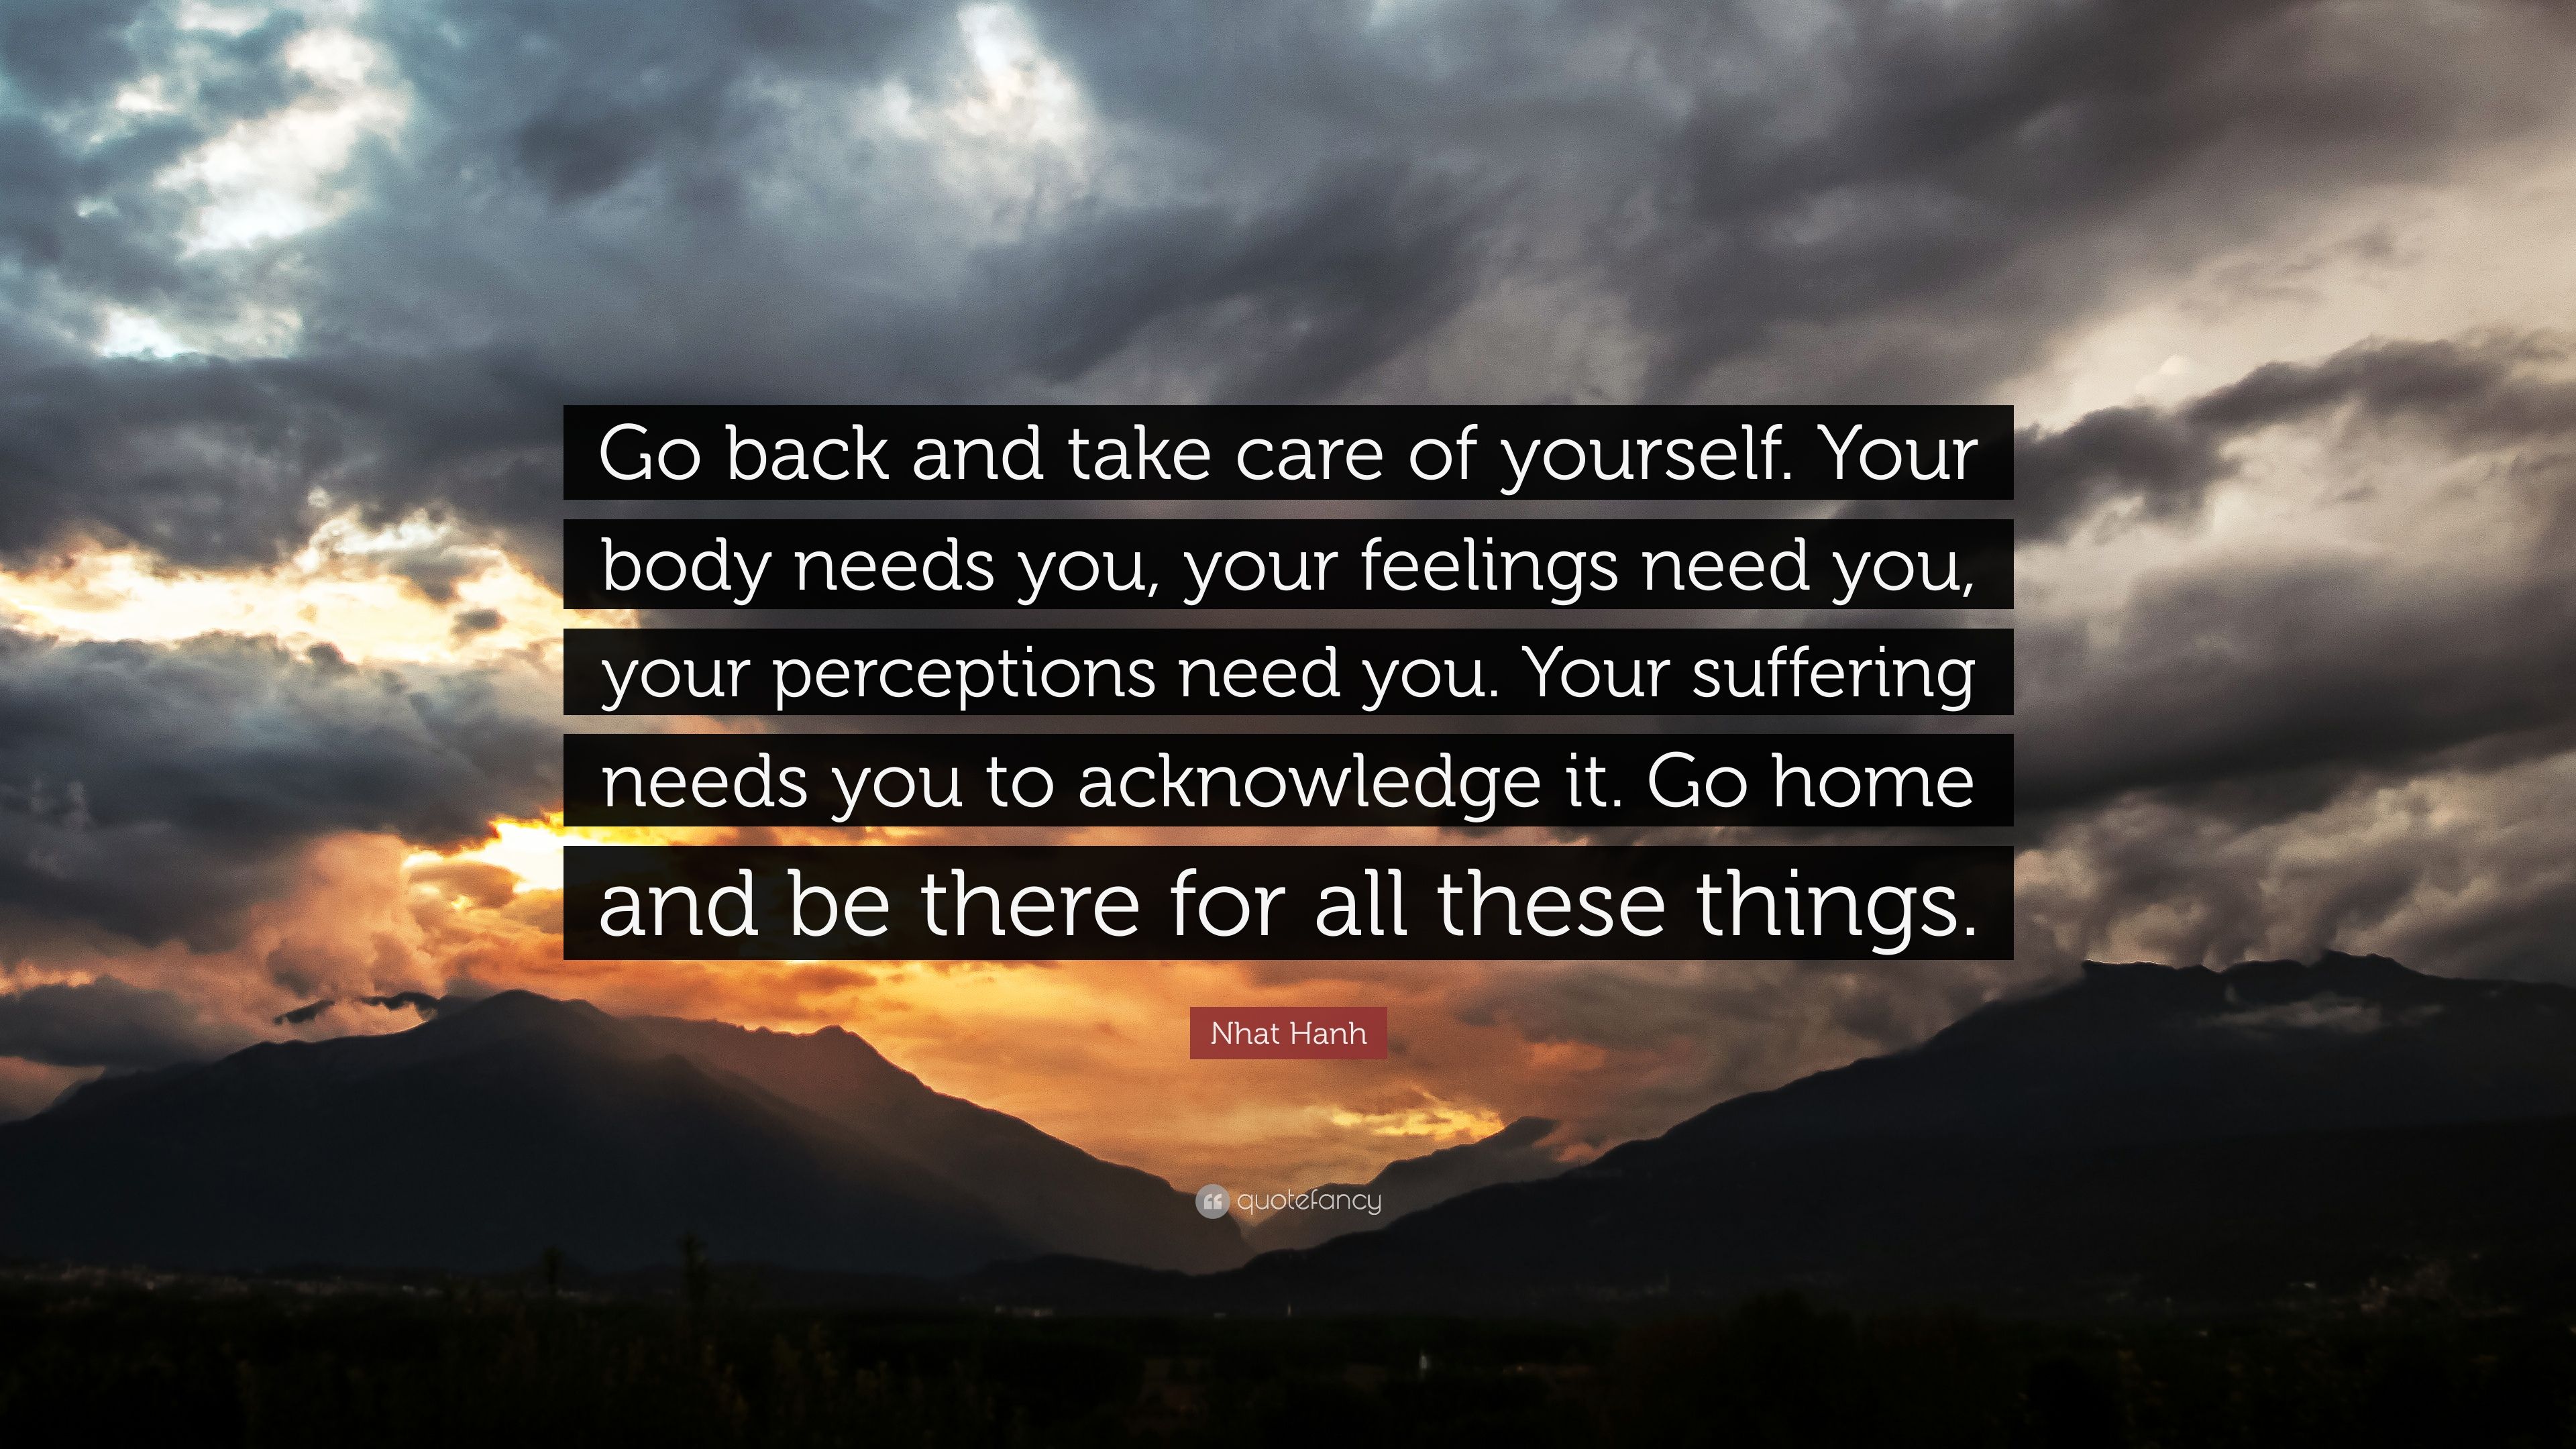 Nhat Hanh Quote: “Go back and take care of yourself. Your body